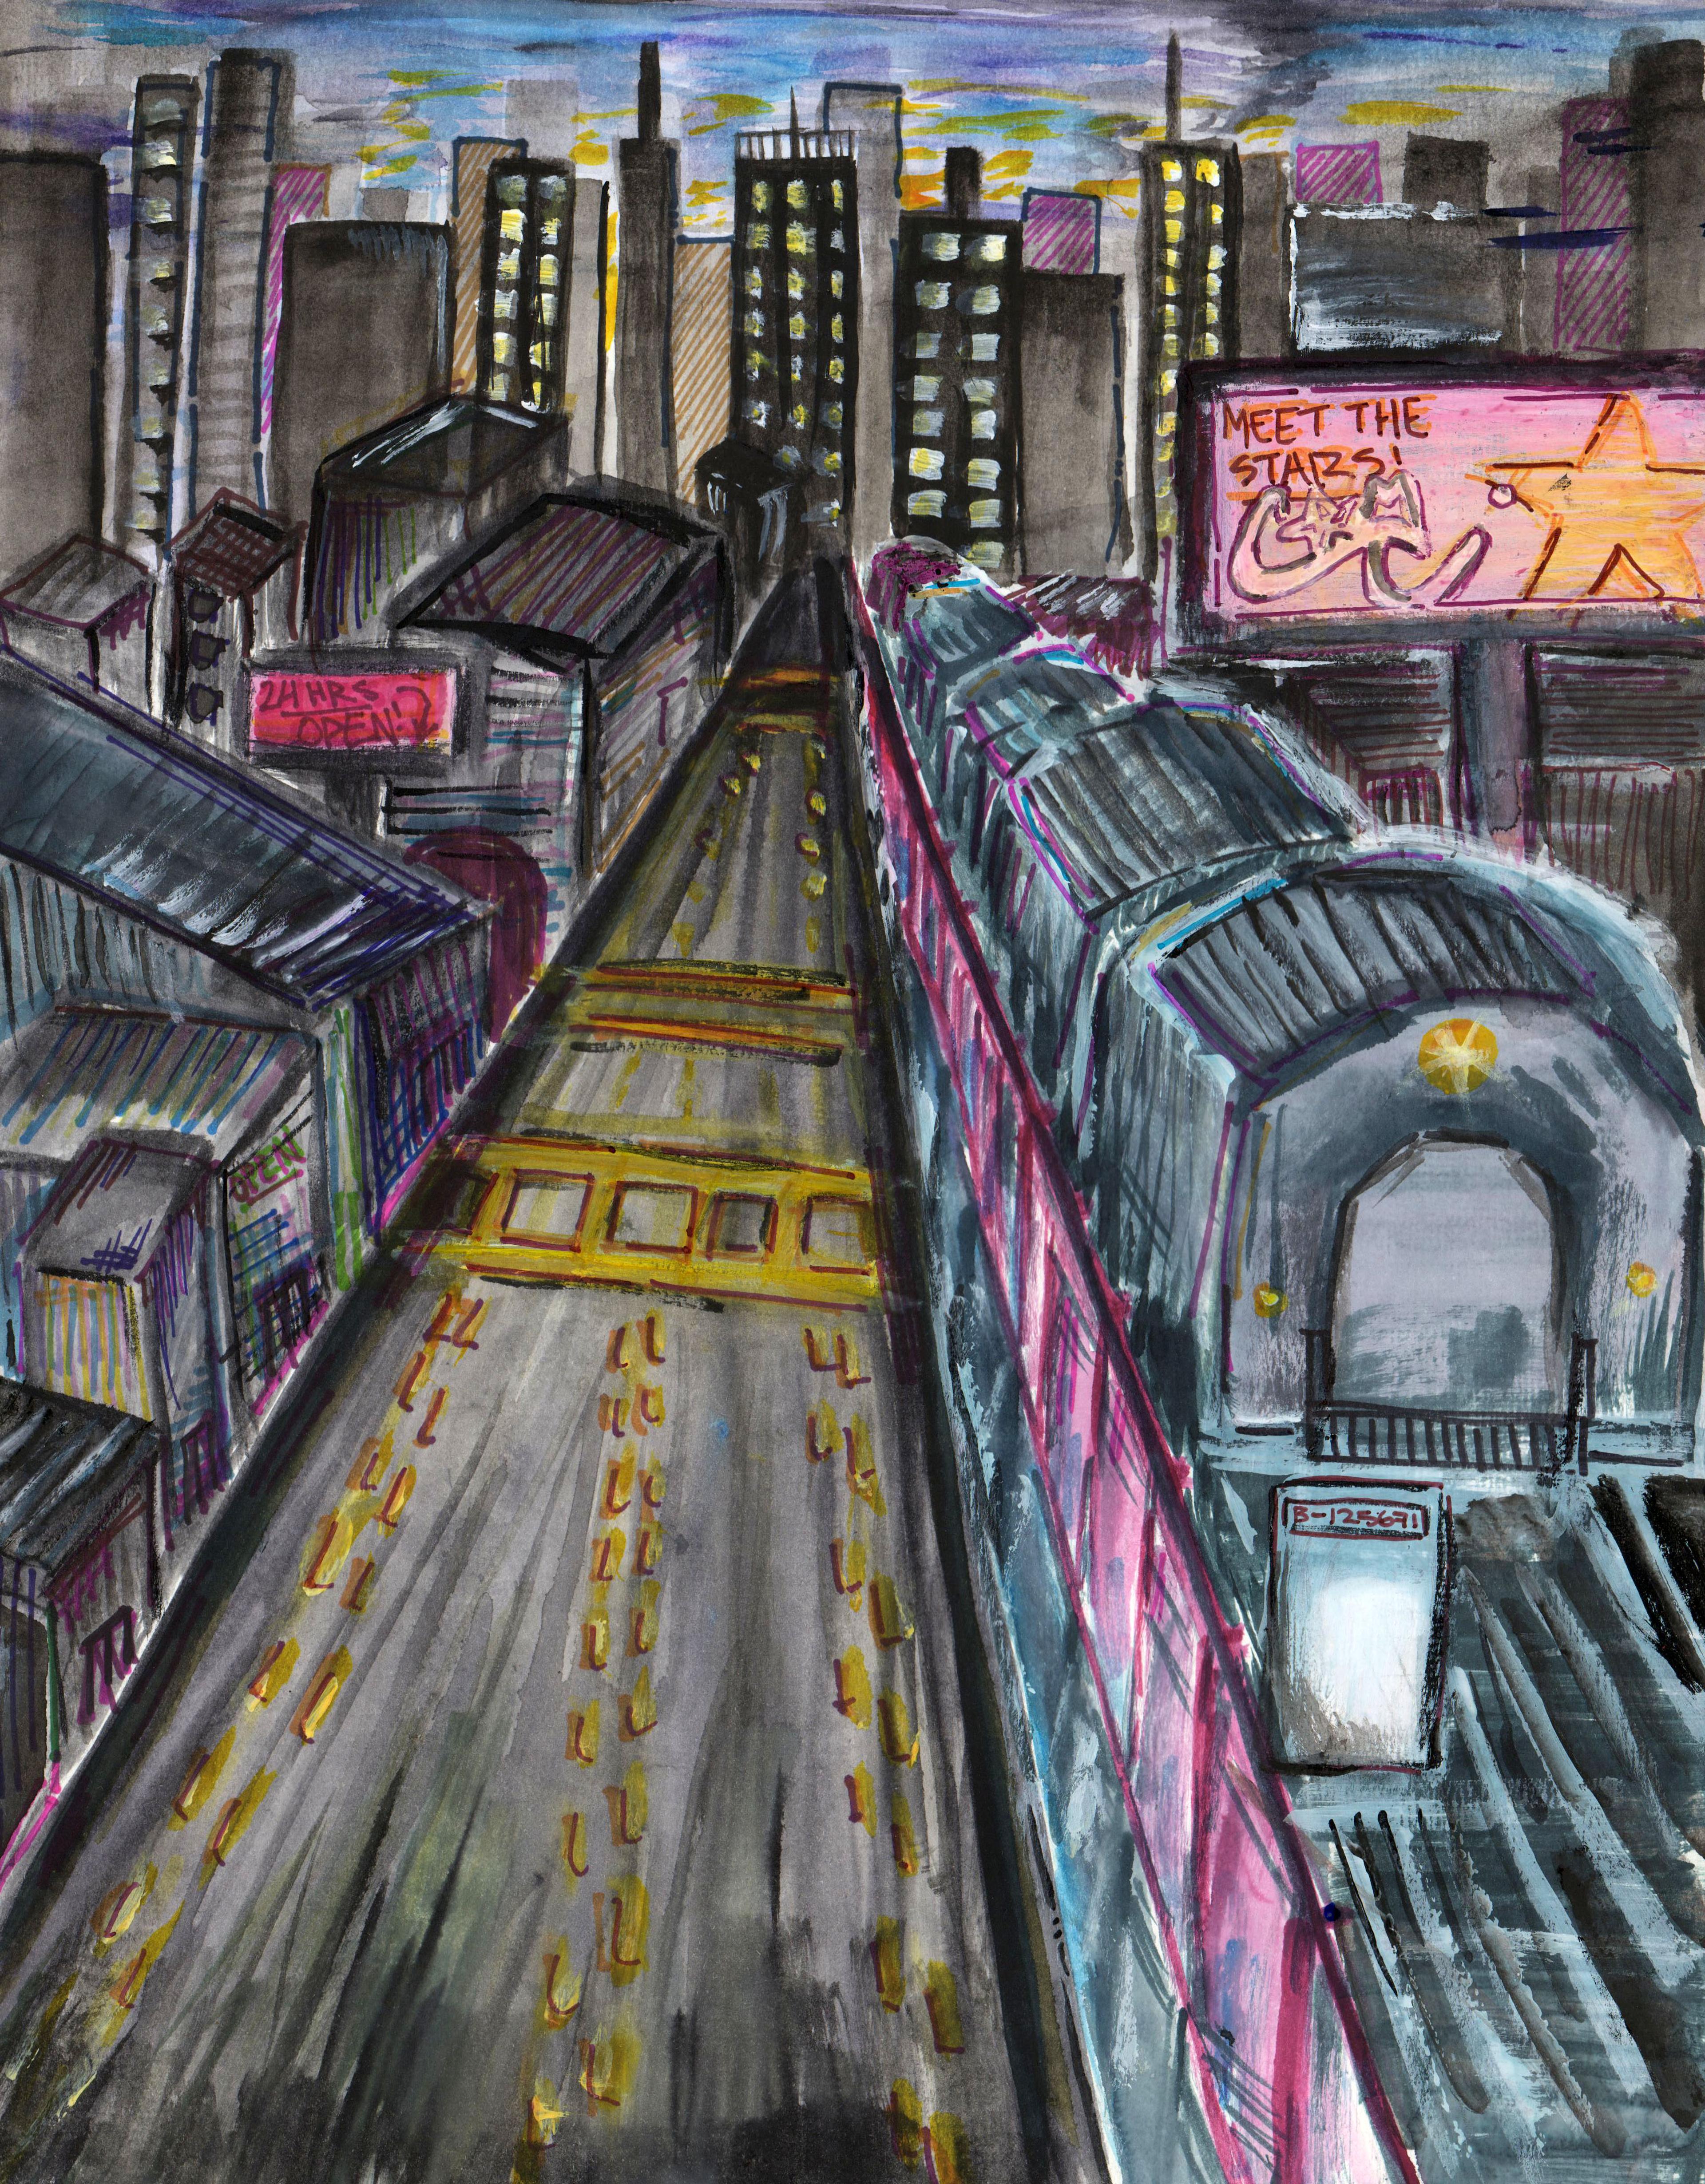 Mixed-media painting of an overhead nighttime view of outdoor elevated subway tracks that recede into the horizon. A long chain of subway cars is on the tracks, and also recedes to the horizon from the lower right corner to the center of the composition. To the left of the tracks is a three-lane gray road separated by yellow dashed lane dividers. Tall buildings with lit yellow windows appear on the horizon. Other buildings run along the left and right sides of the road and train tracks. A red sign on a building on the left reads, "24 HRS OPEN!" A bright pink billboard on a tall signpost to the right reads, "MEET THE STARS!" with a large yellow five-pointed star at the right of the headline.